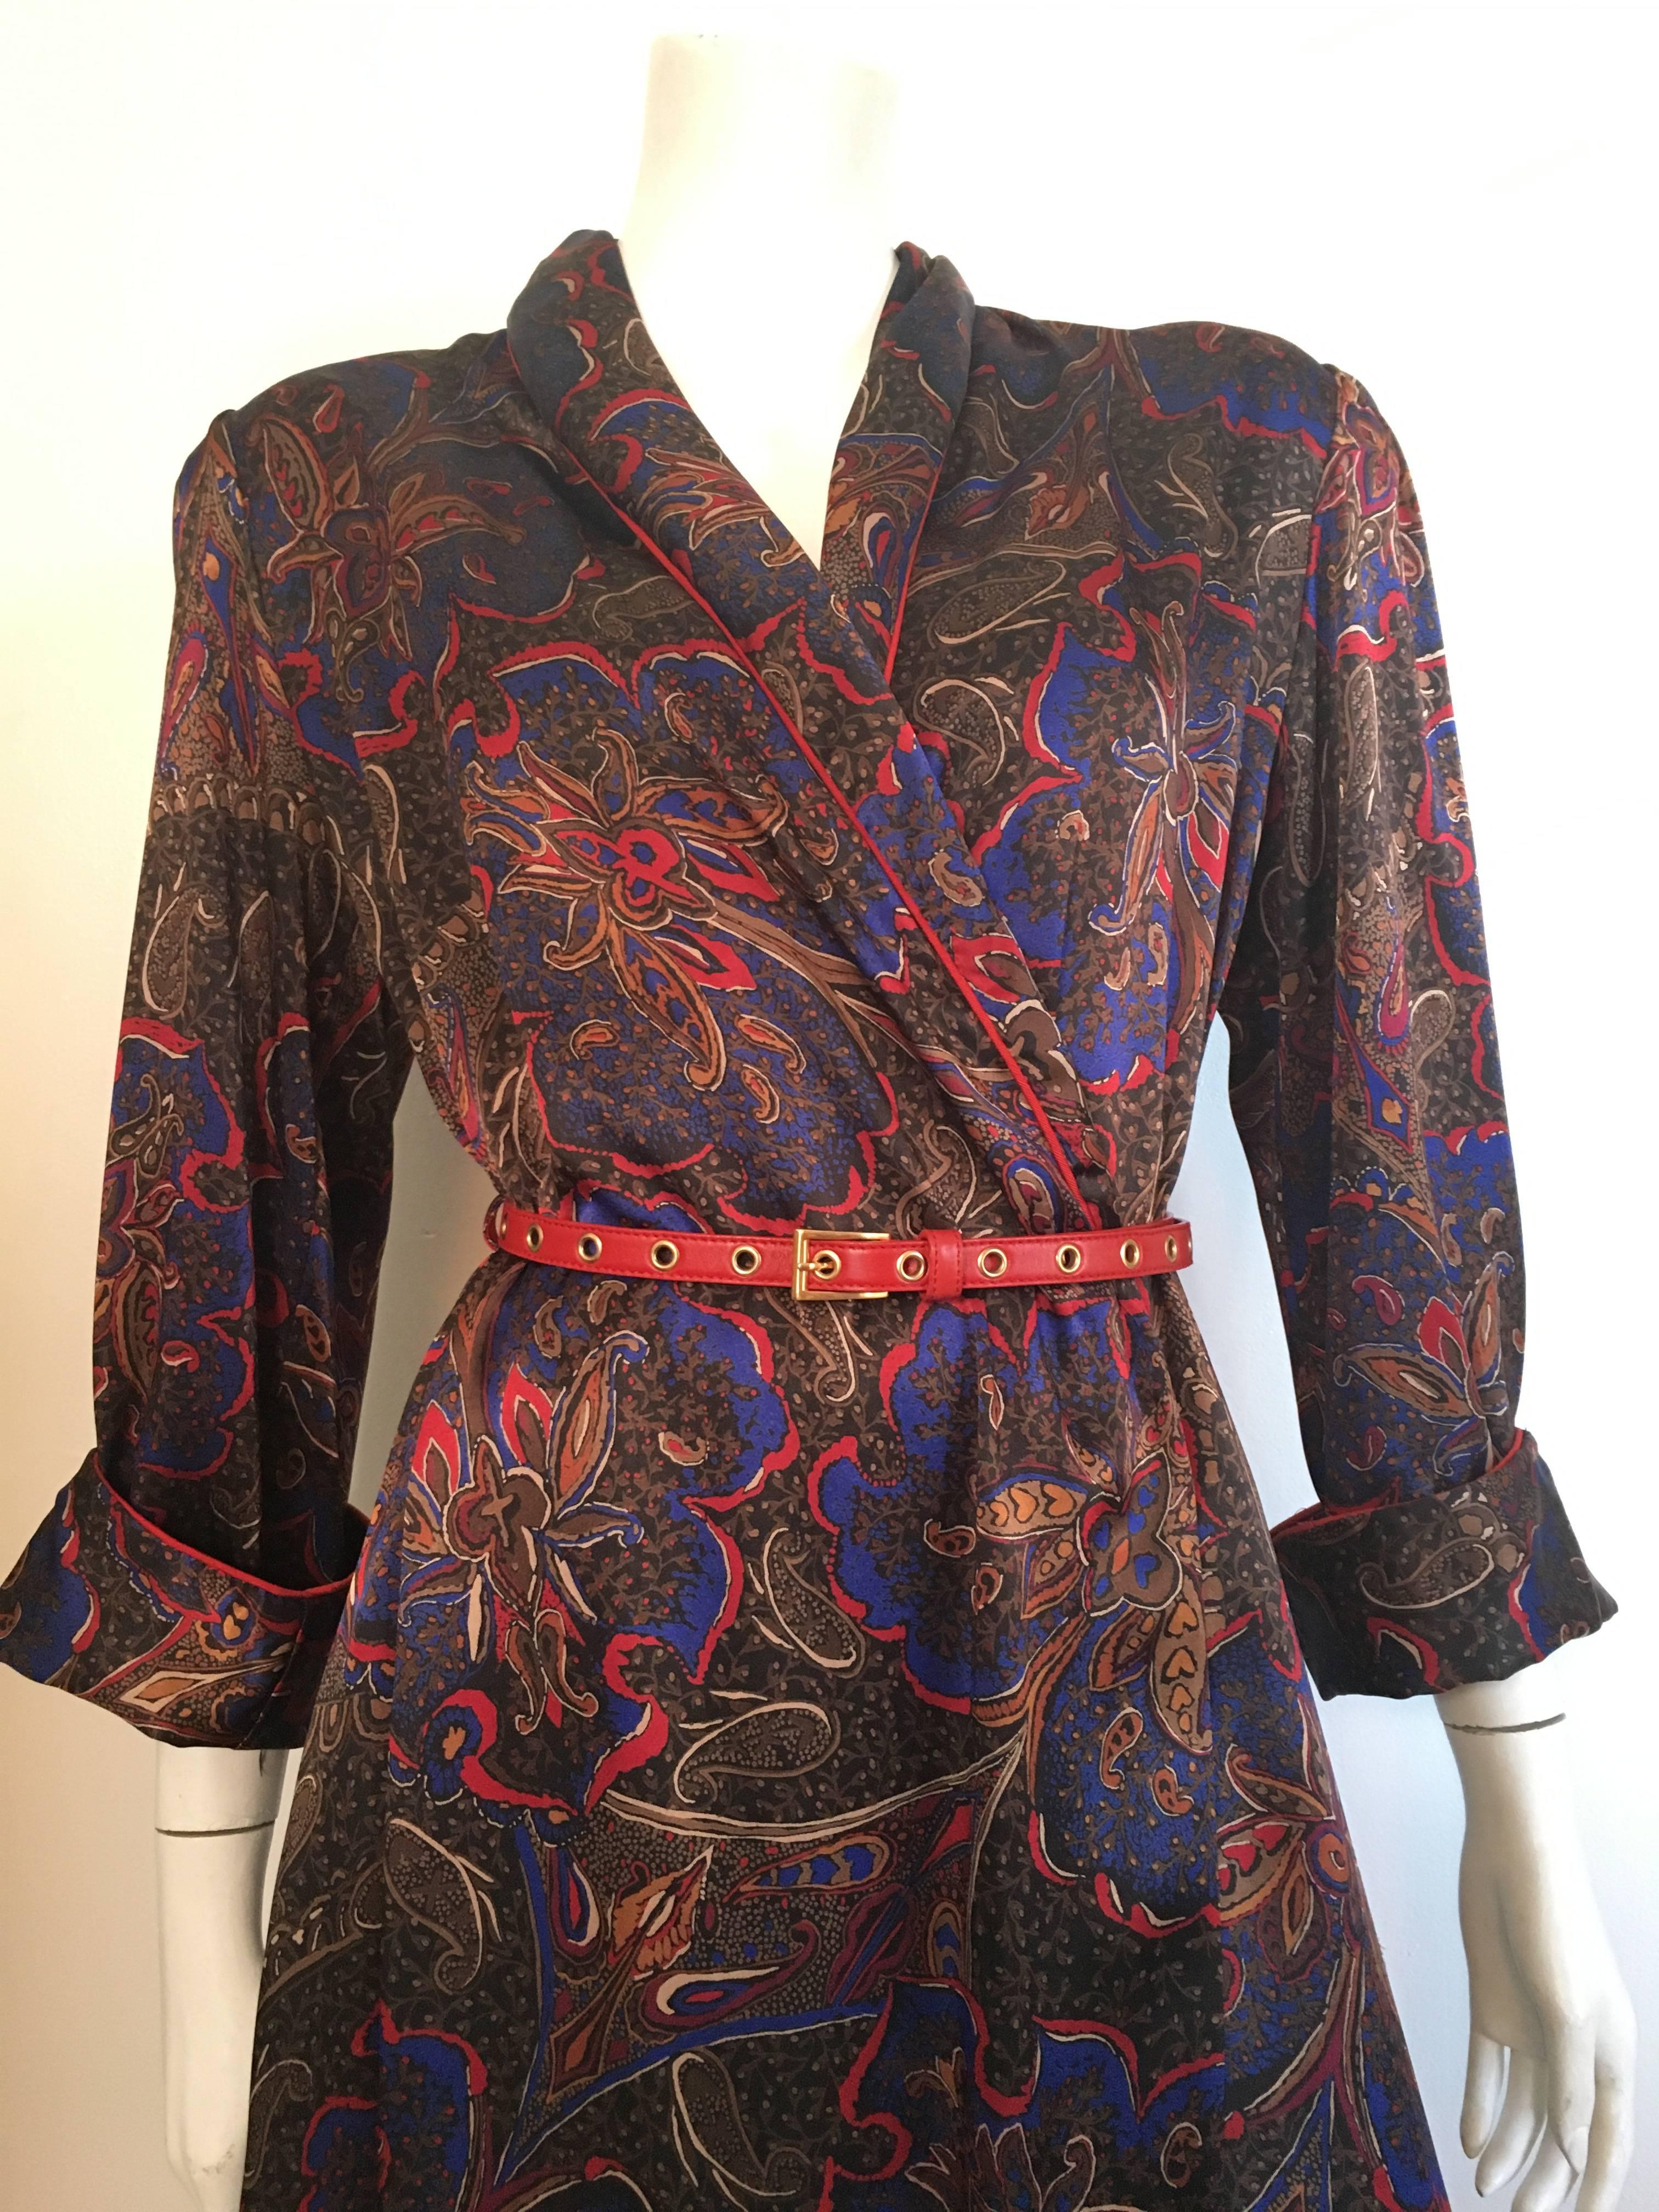 Black Bill Blass for Neiman Marcus 1980s Paisley Wrap Dress with Pockets Size Medium. For Sale